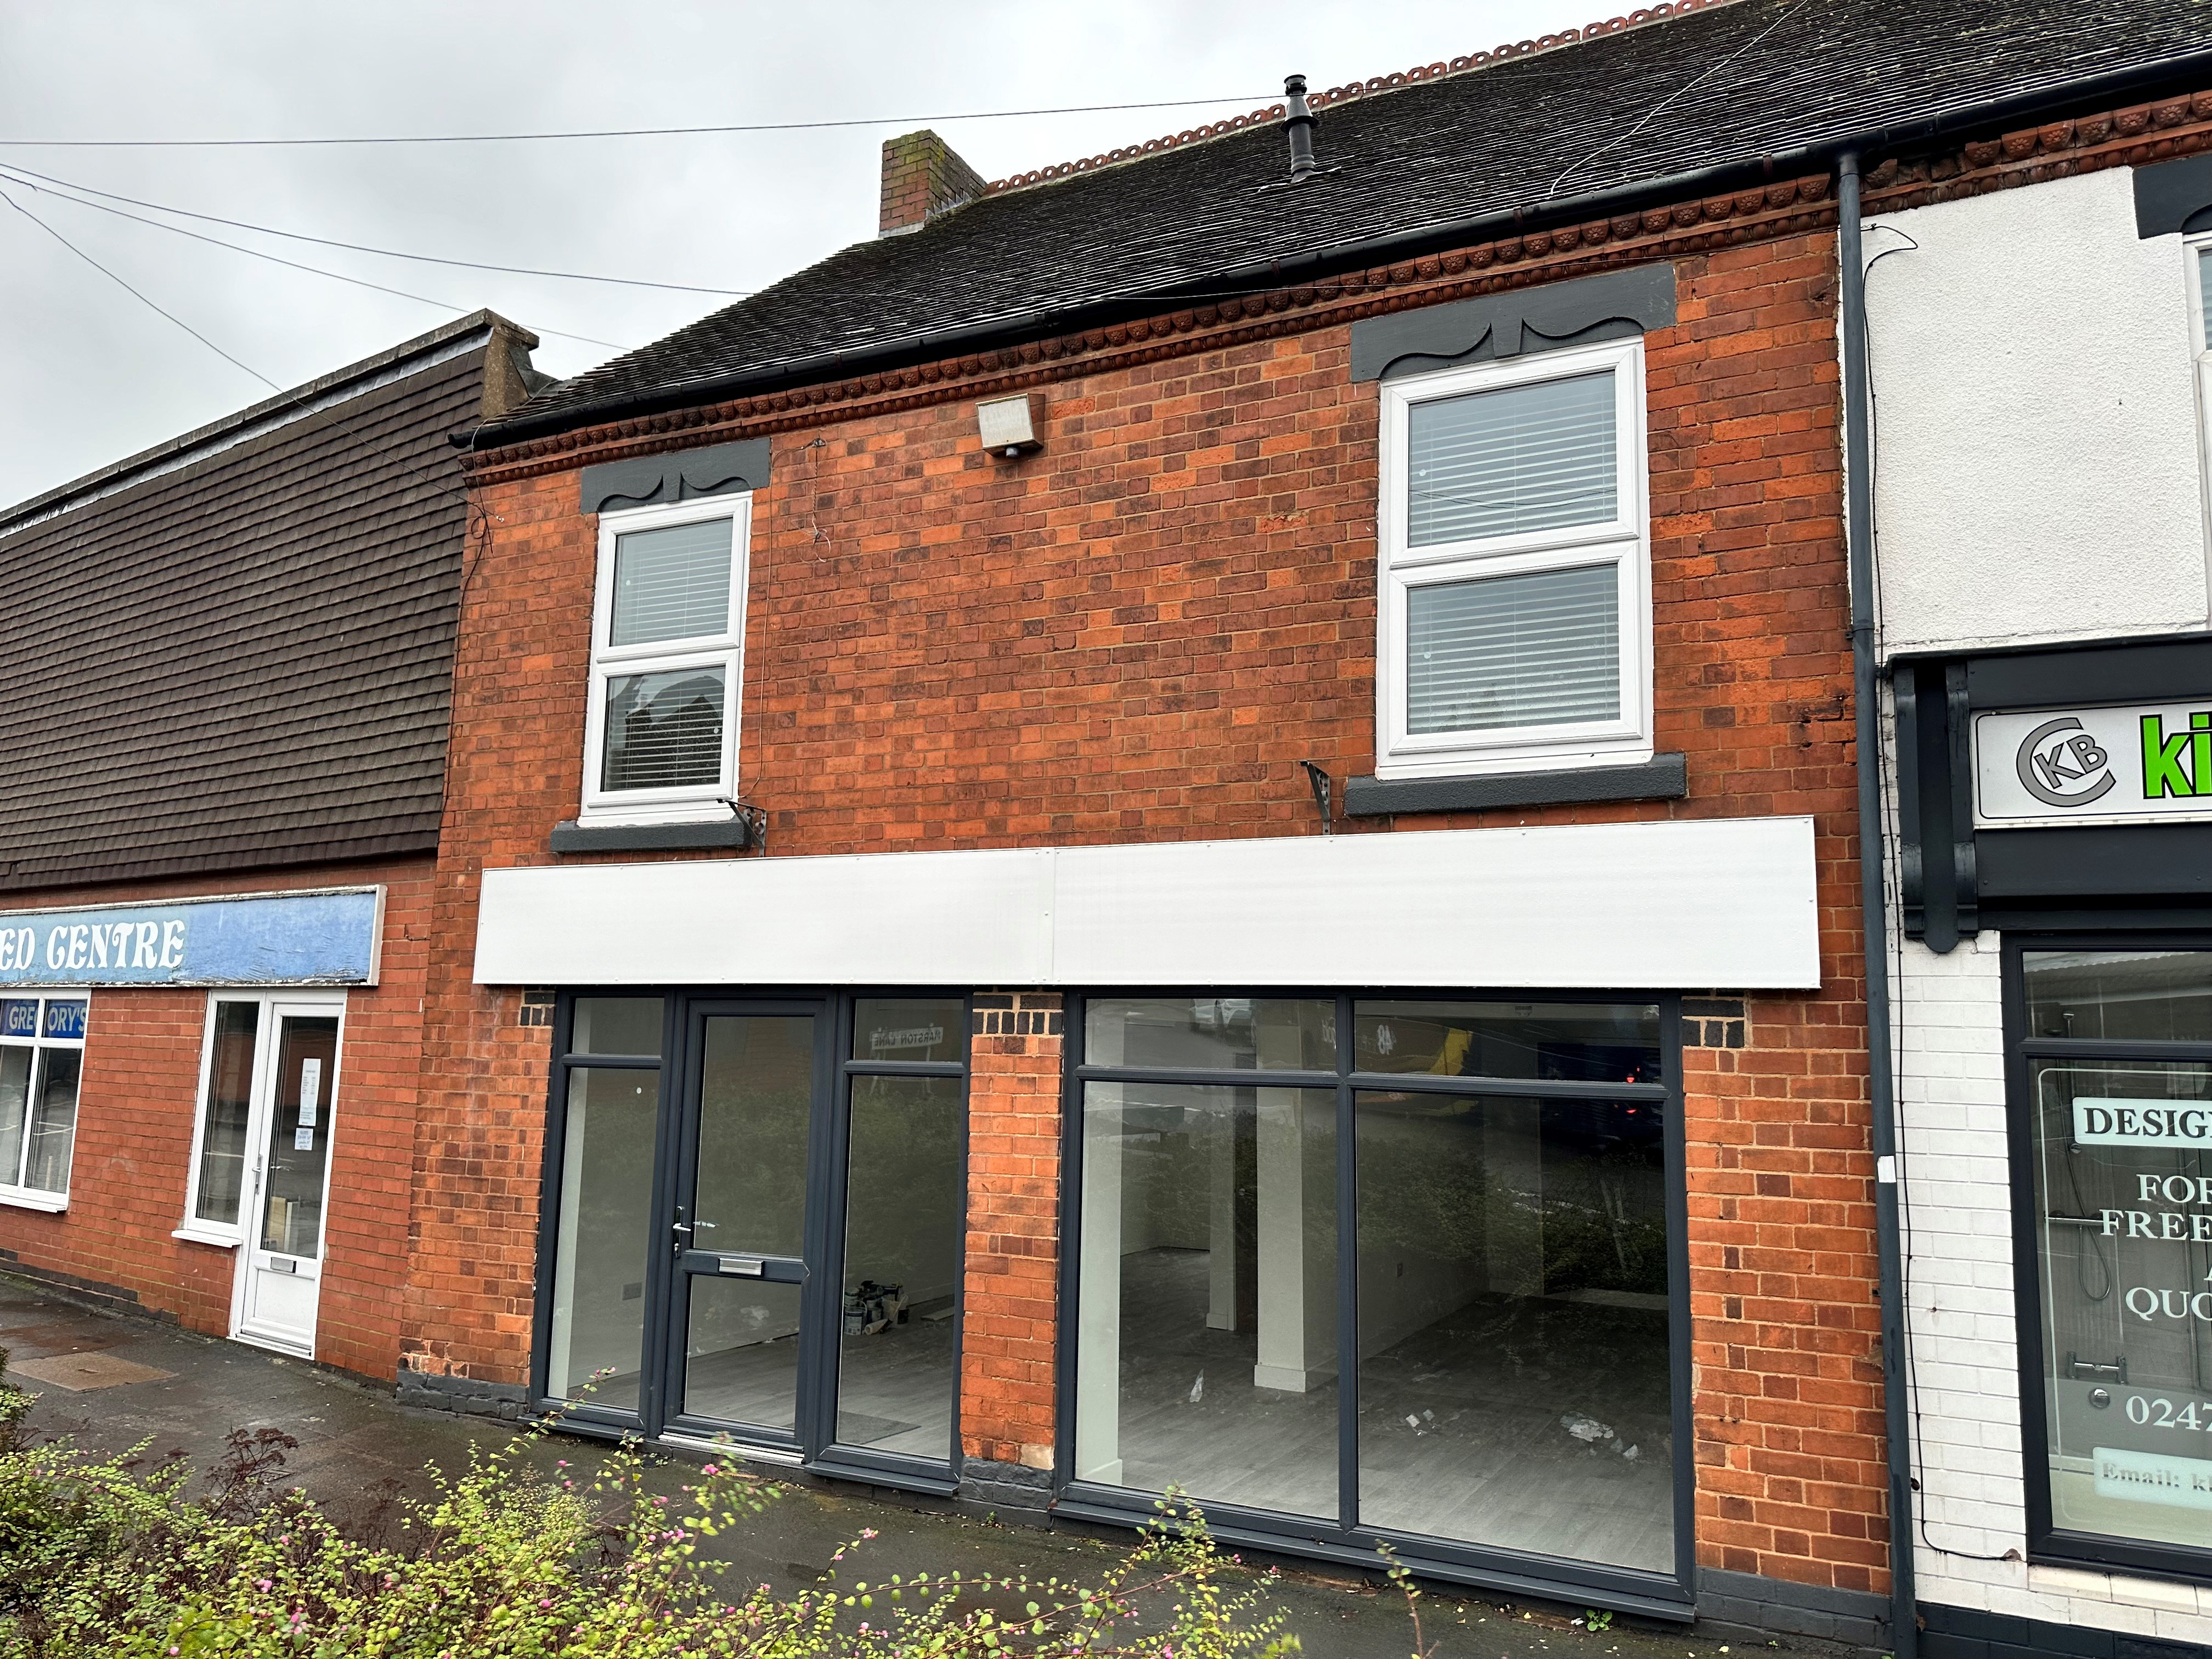 Retail Property (High Street) for rent in Nuneaton. From Cartwright Hands - Commercial